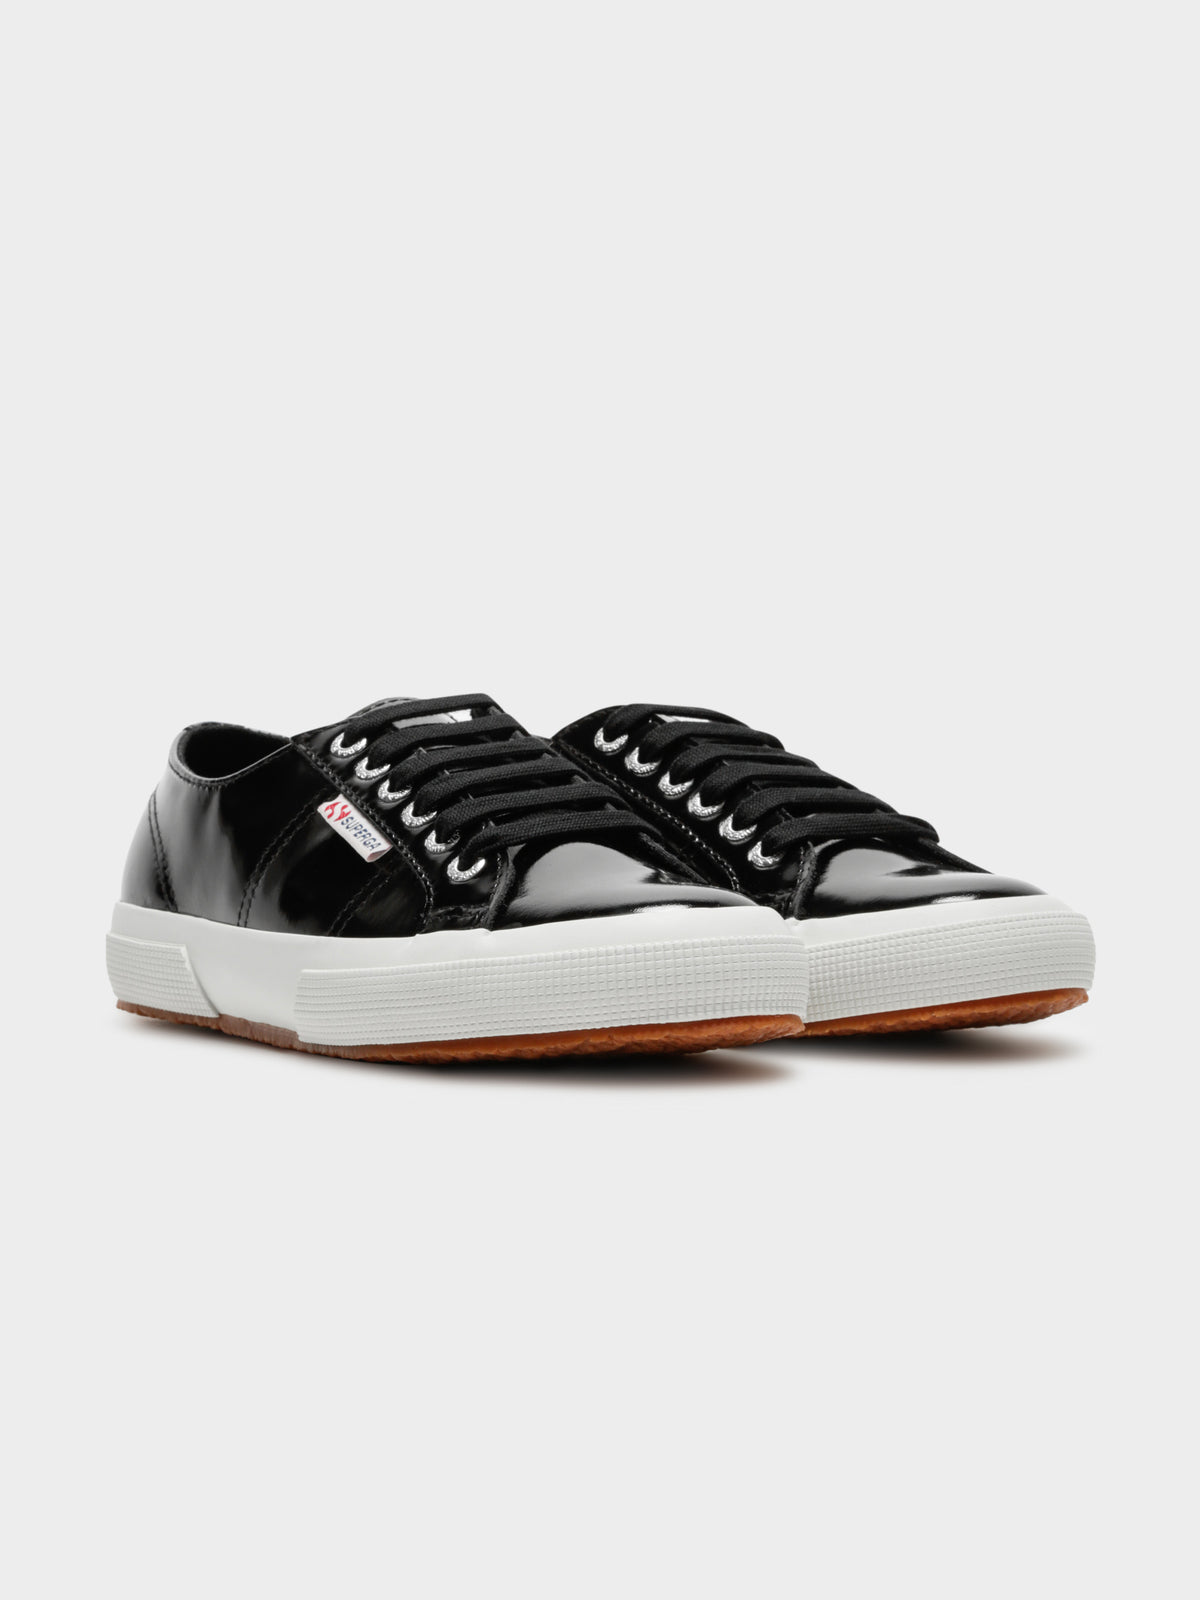 Womens 2750 Leapatentw Sneakers in Shiny Black